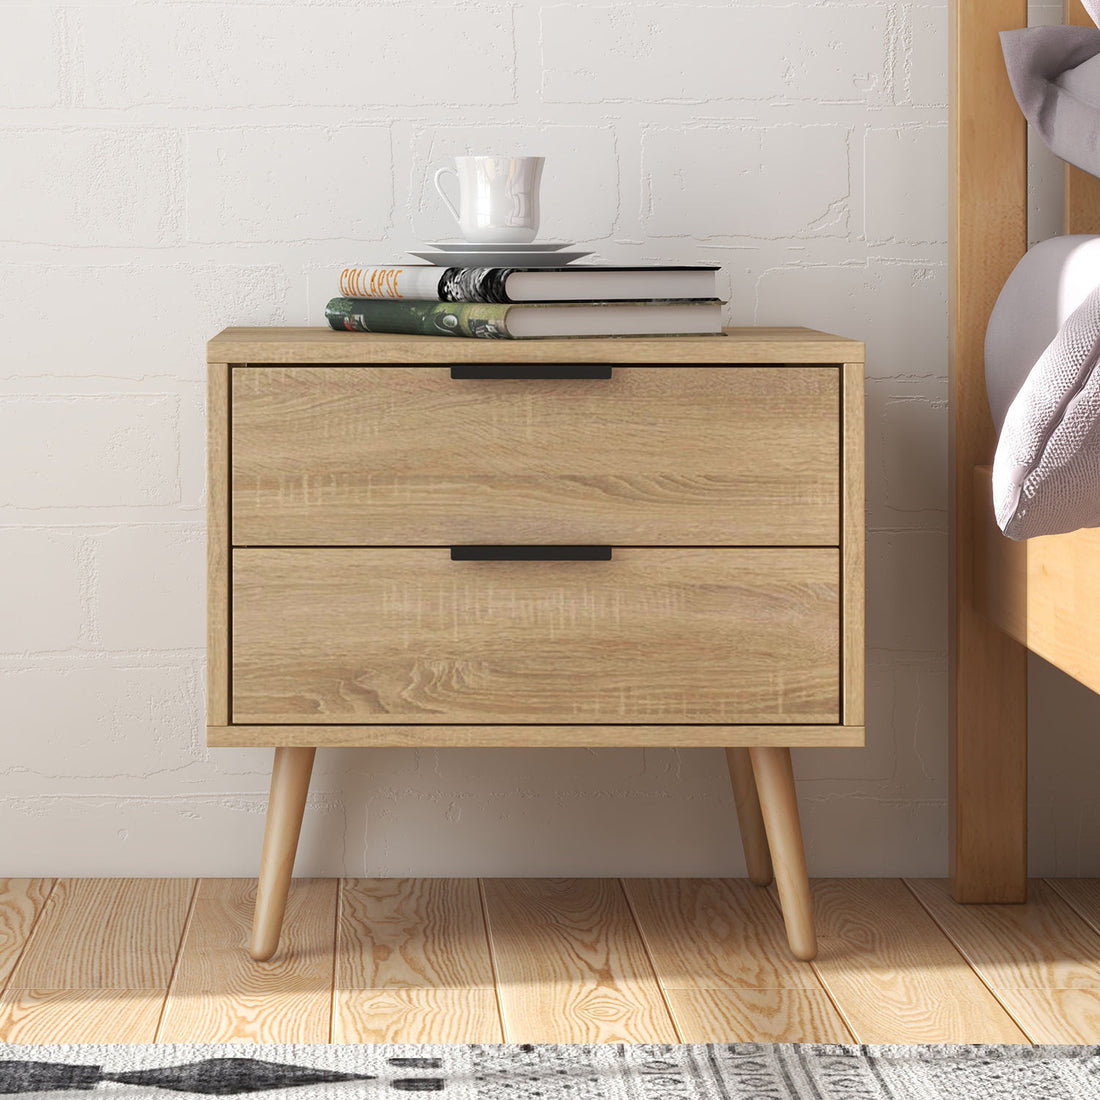 Milano Decor Bedside Table Paddington Drawers Nightstand Unit Cabinet Storage-Bedside Tables-PEROZ Accessories